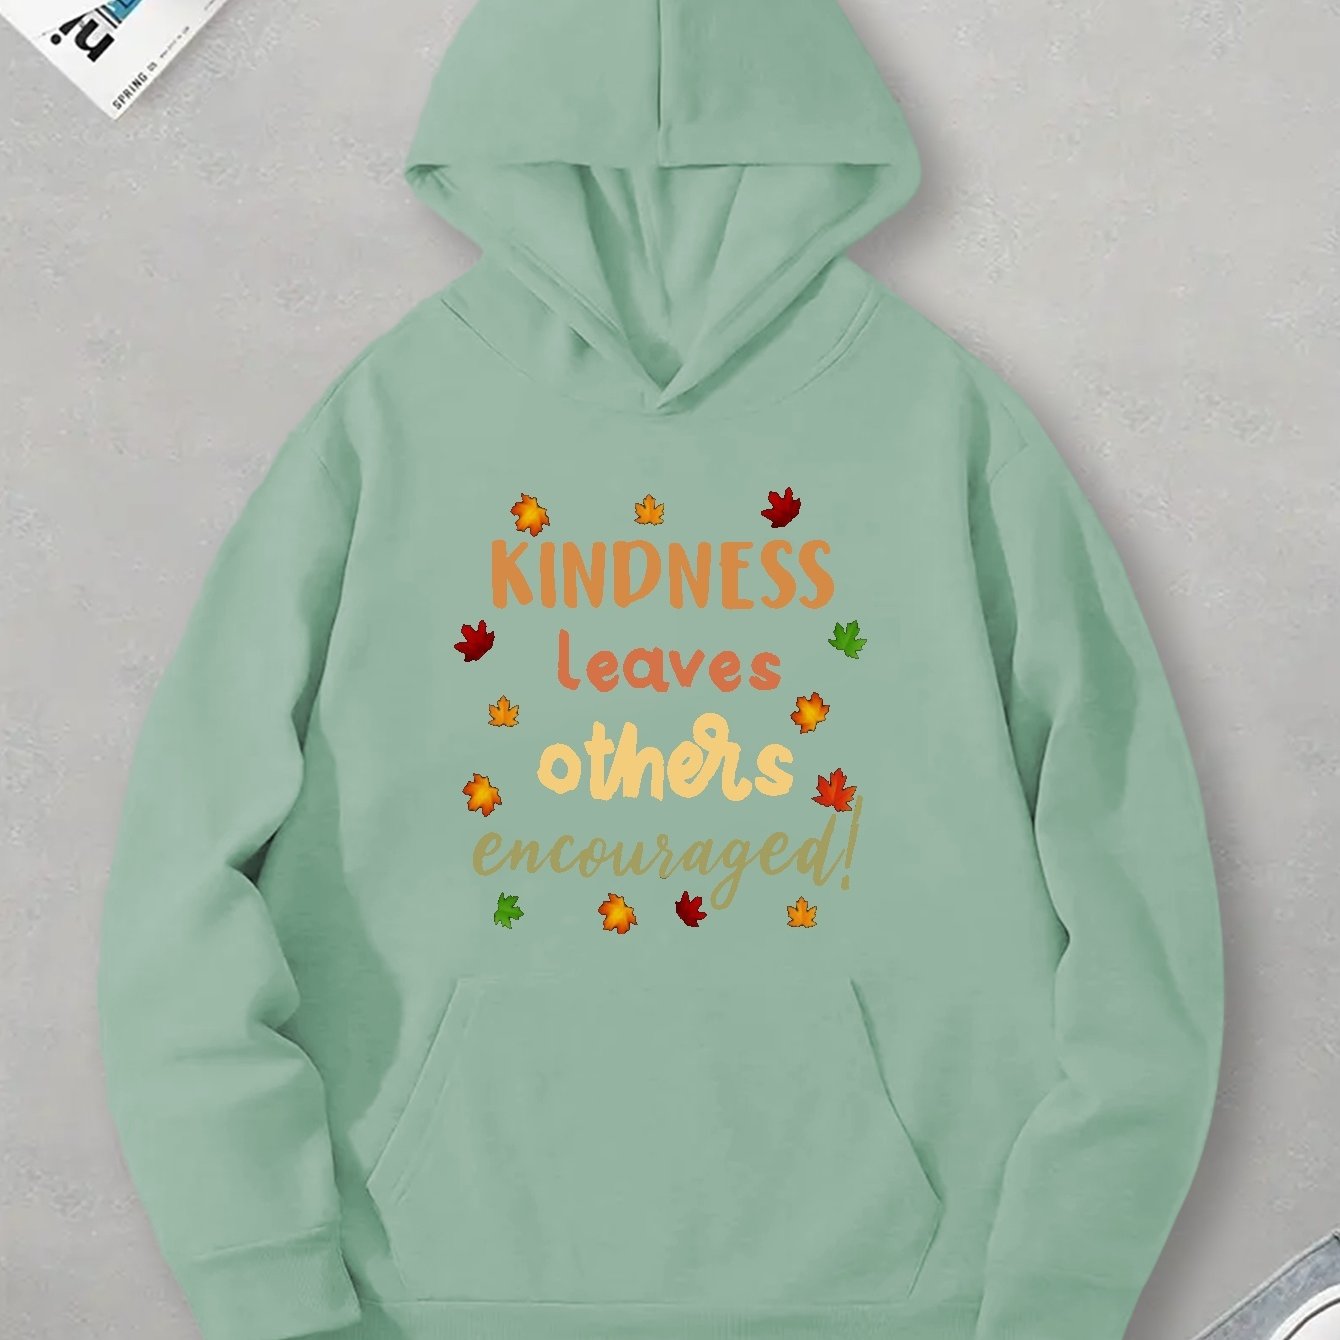 KINDNESS LEAVES OTHERS ENCOURAGED Women's Christian Pullover Hooded Sweatshirt claimedbygoddesigns